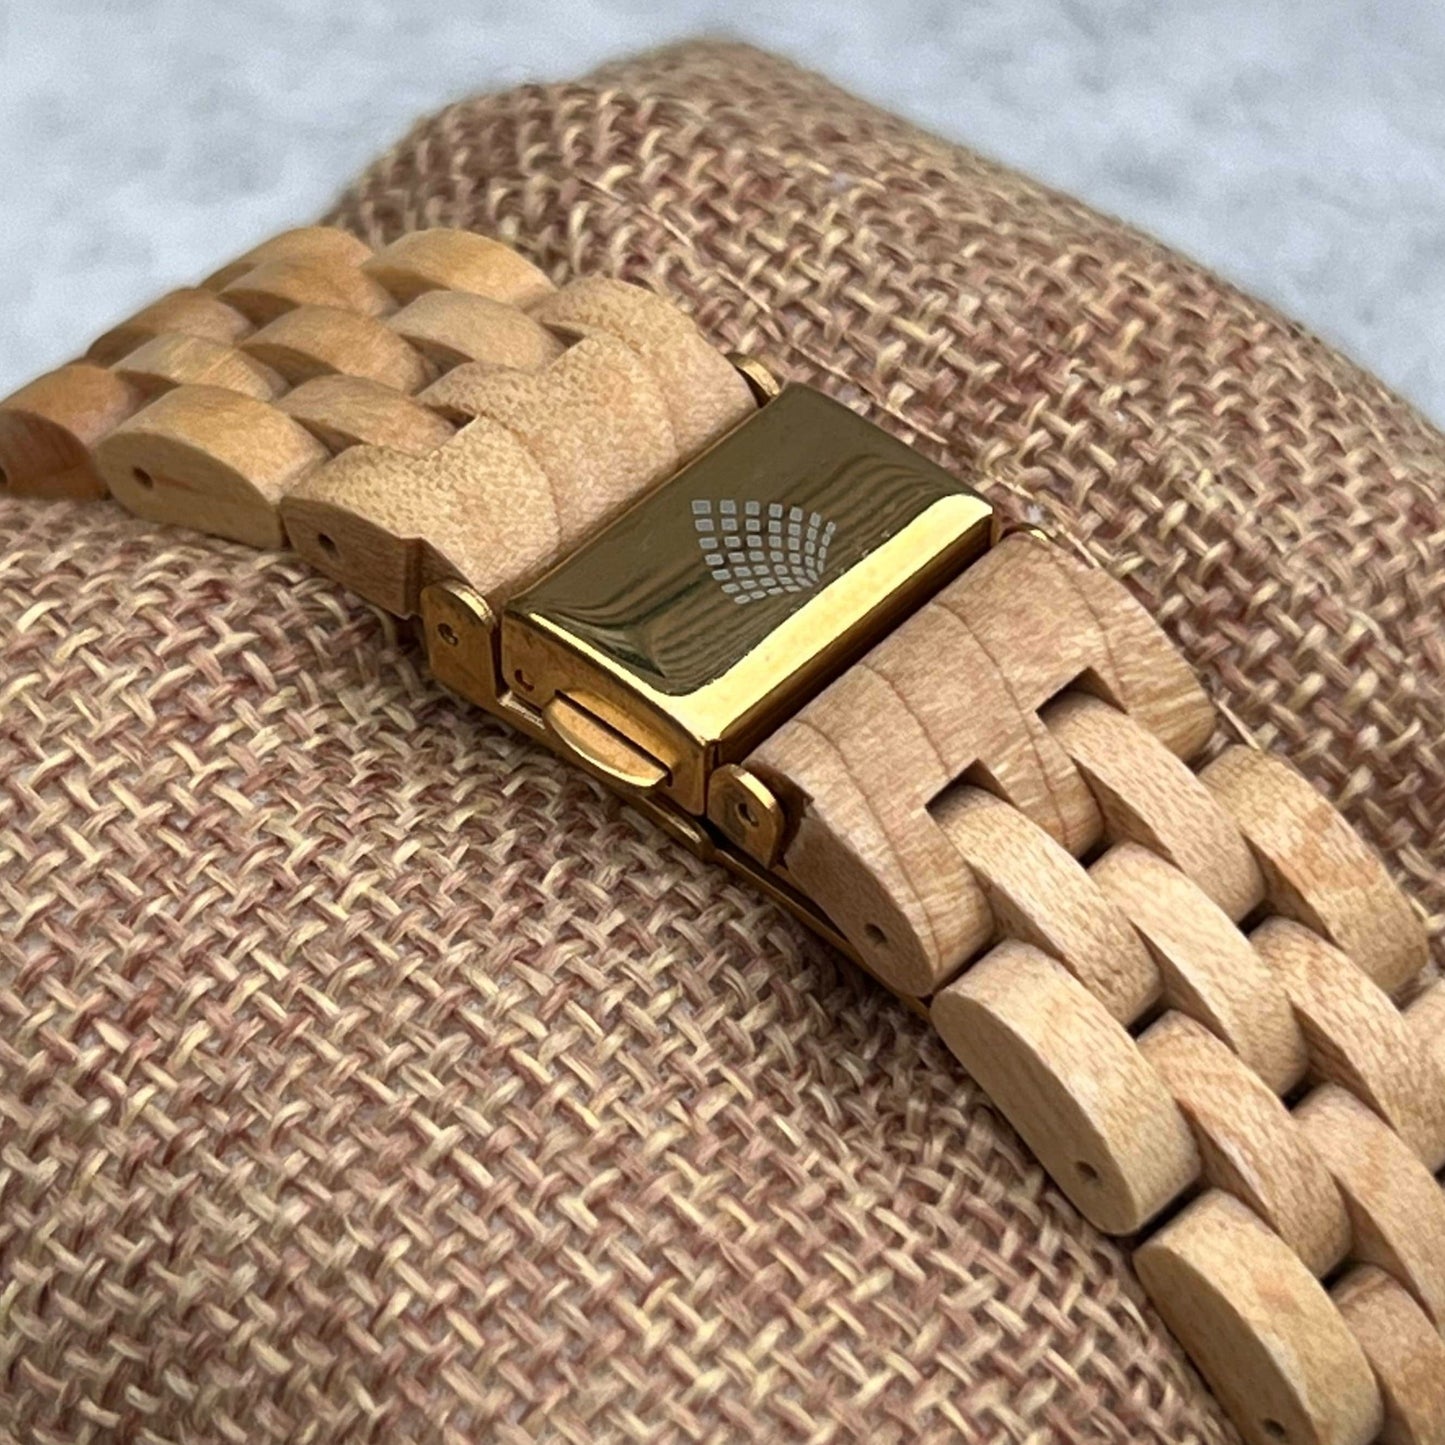 The clasp of the Birch wooden watch for women